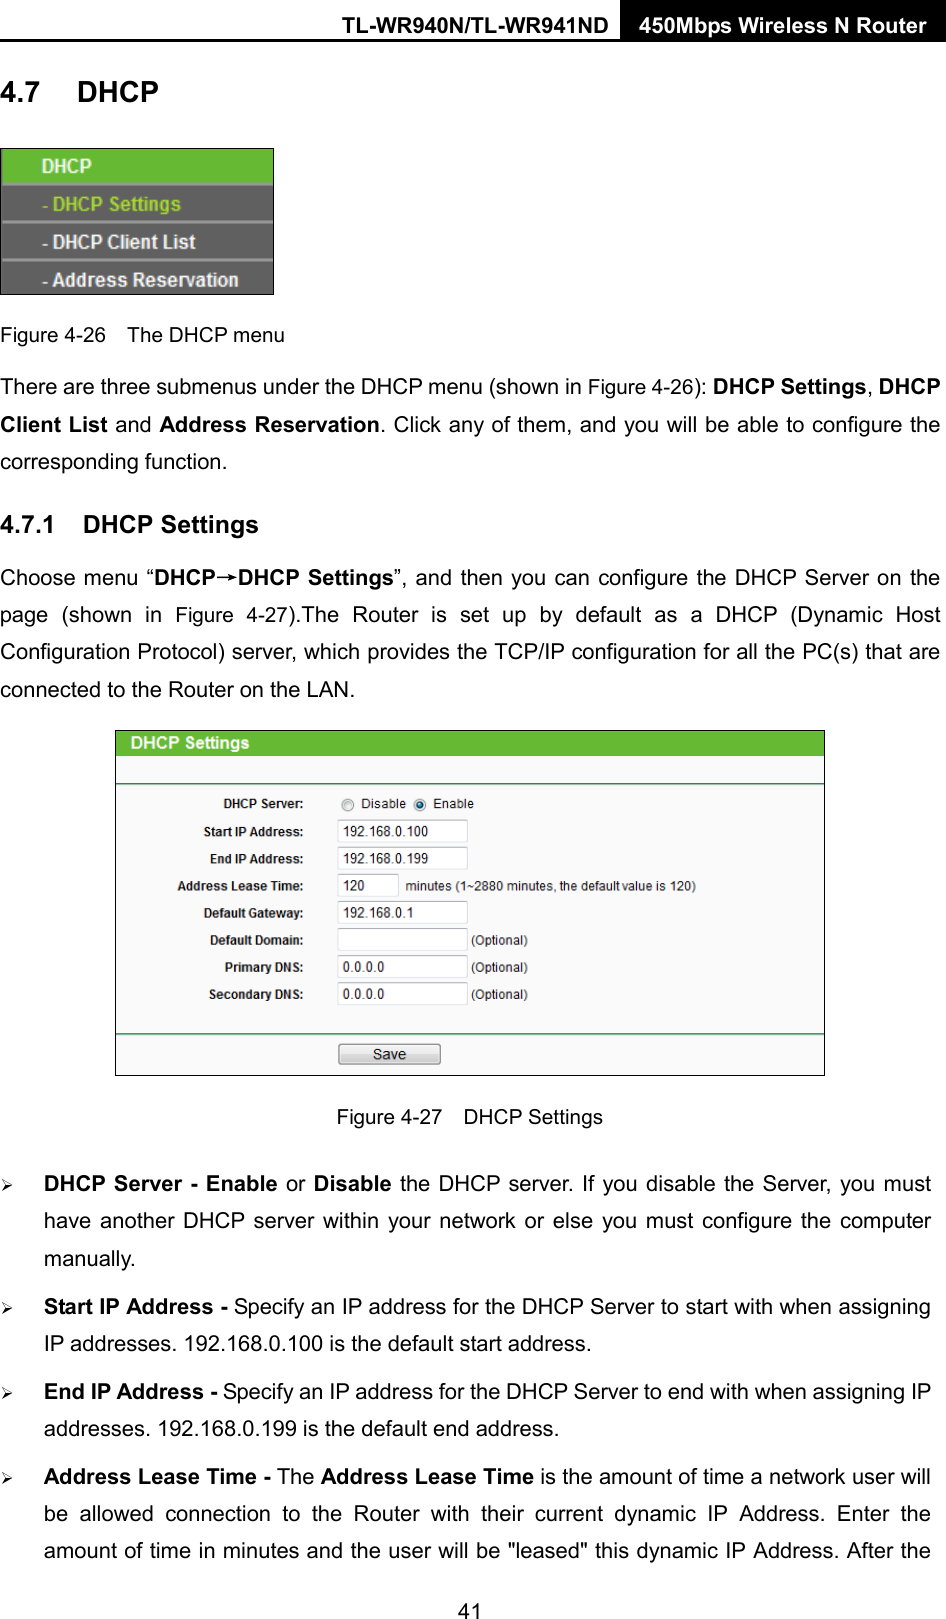 TL-WR940N/TL-WR941ND 450Mbps Wireless N Router  4.7 DHCP  Figure 4-26  The DHCP menu There are three submenus under the DHCP menu (shown in Figure 4-26): DHCP Settings, DHCP Client List and Address Reservation. Click any of them, and you will be able to configure the corresponding function. 4.7.1 DHCP Settings Choose menu “DHCP→DHCP Settings”, and then you can configure the DHCP Server on the page (shown in Figure  4-27).The  Router is set up by default as a DHCP (Dynamic Host Configuration Protocol) server, which provides the TCP/IP configuration for all the PC(s) that are connected to the Router on the LAN.    Figure 4-27  DHCP Settings  DHCP Server - Enable or Disable the DHCP server. If you disable the Server, you must have another DHCP server within your network or else you must configure the computer manually.  Start IP Address - Specify an IP address for the DHCP Server to start with when assigning IP addresses. 192.168.0.100 is the default start address.  End IP Address - Specify an IP address for the DHCP Server to end with when assigning IP addresses. 192.168.0.199 is the default end address.  Address Lease Time - The Address Lease Time is the amount of time a network user will be allowed connection to the Router with their current dynamic IP Address. Enter the amount of time in minutes and the user will be &quot;leased&quot; this dynamic IP Address. After the 41 